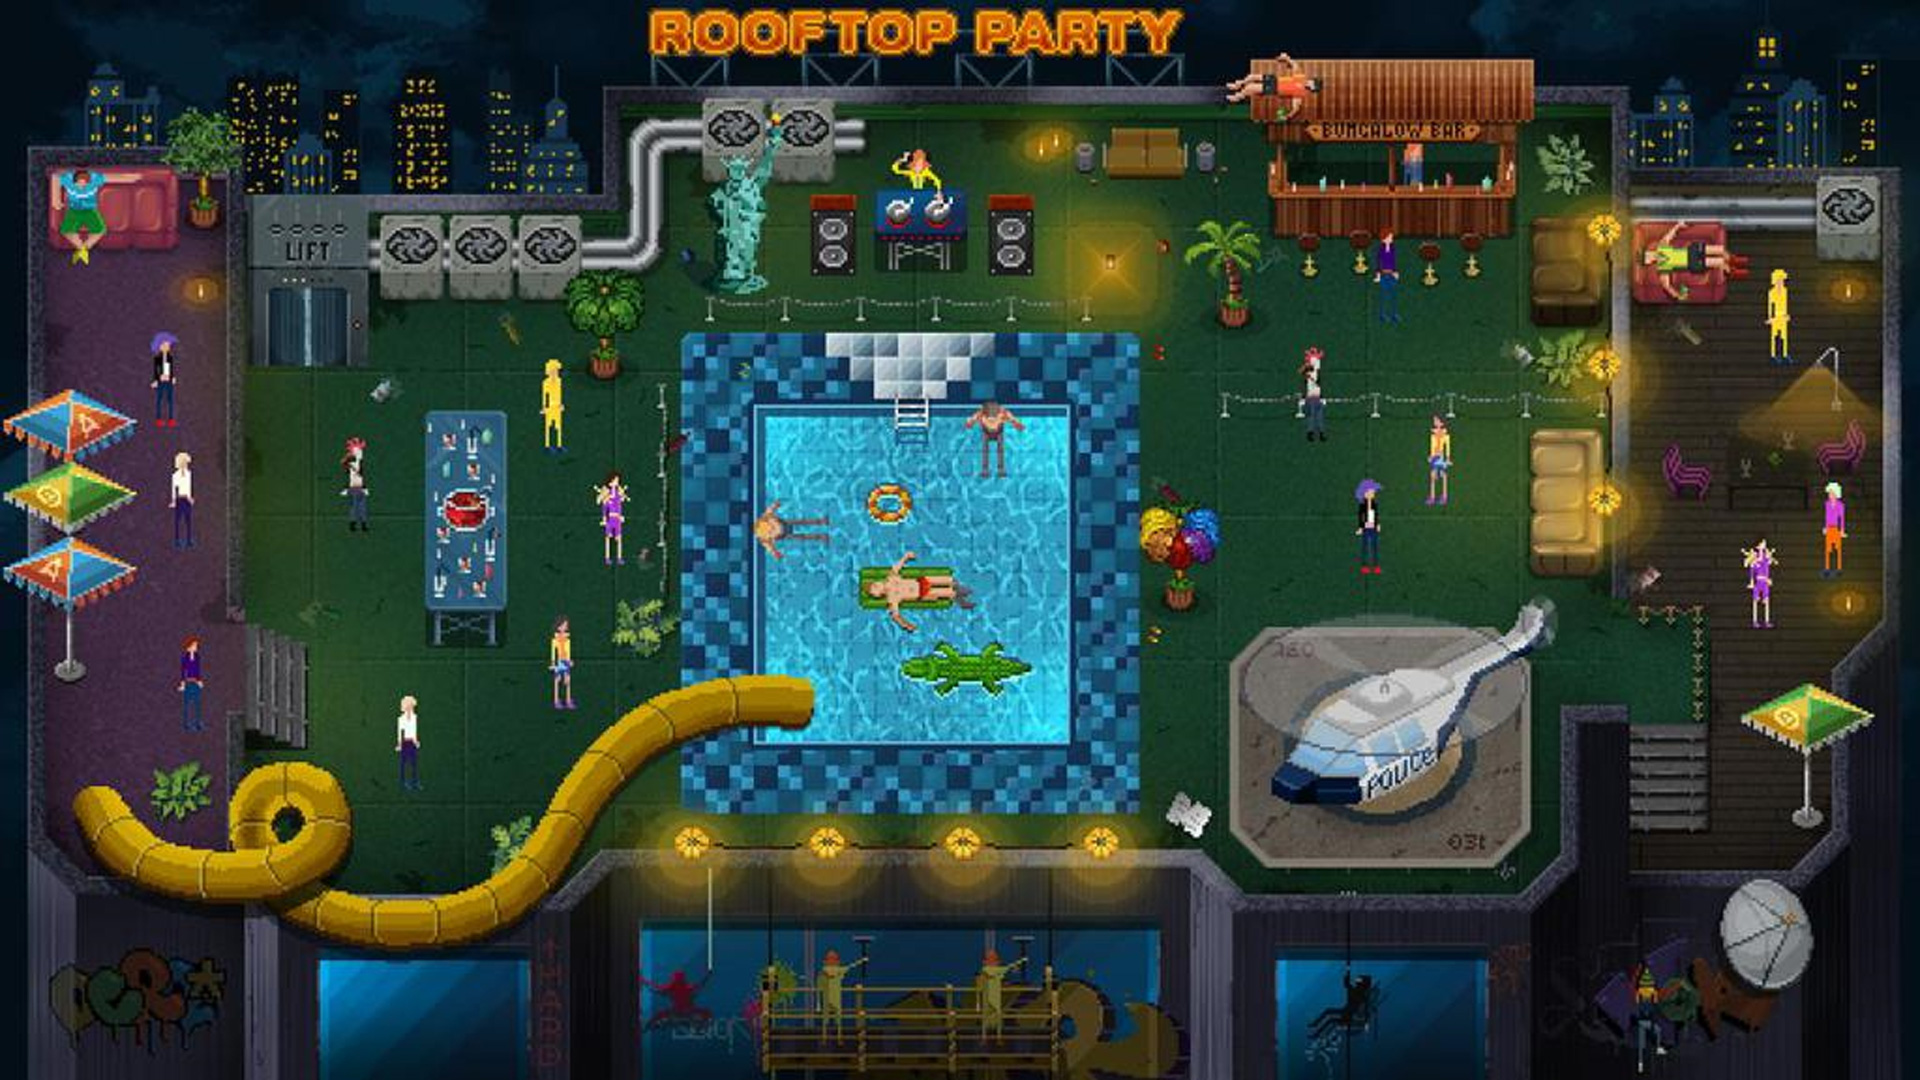 Party Hard PC Review - Gamerheadquarters